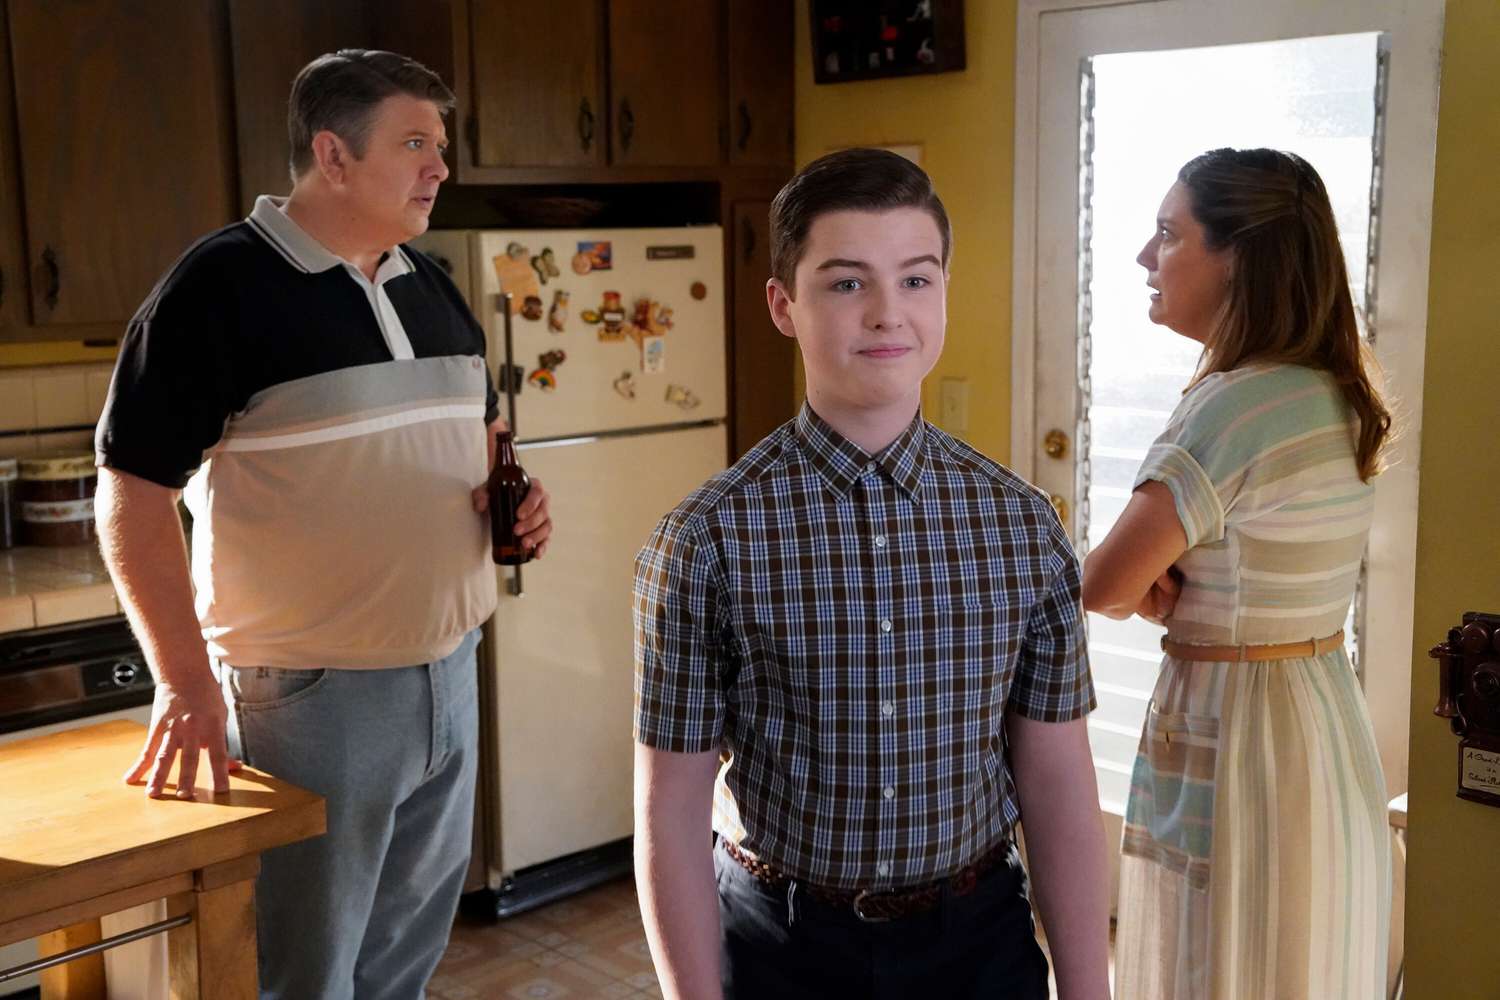 The Final Curtain for George Cooper Sr. in "Young Sheldon"